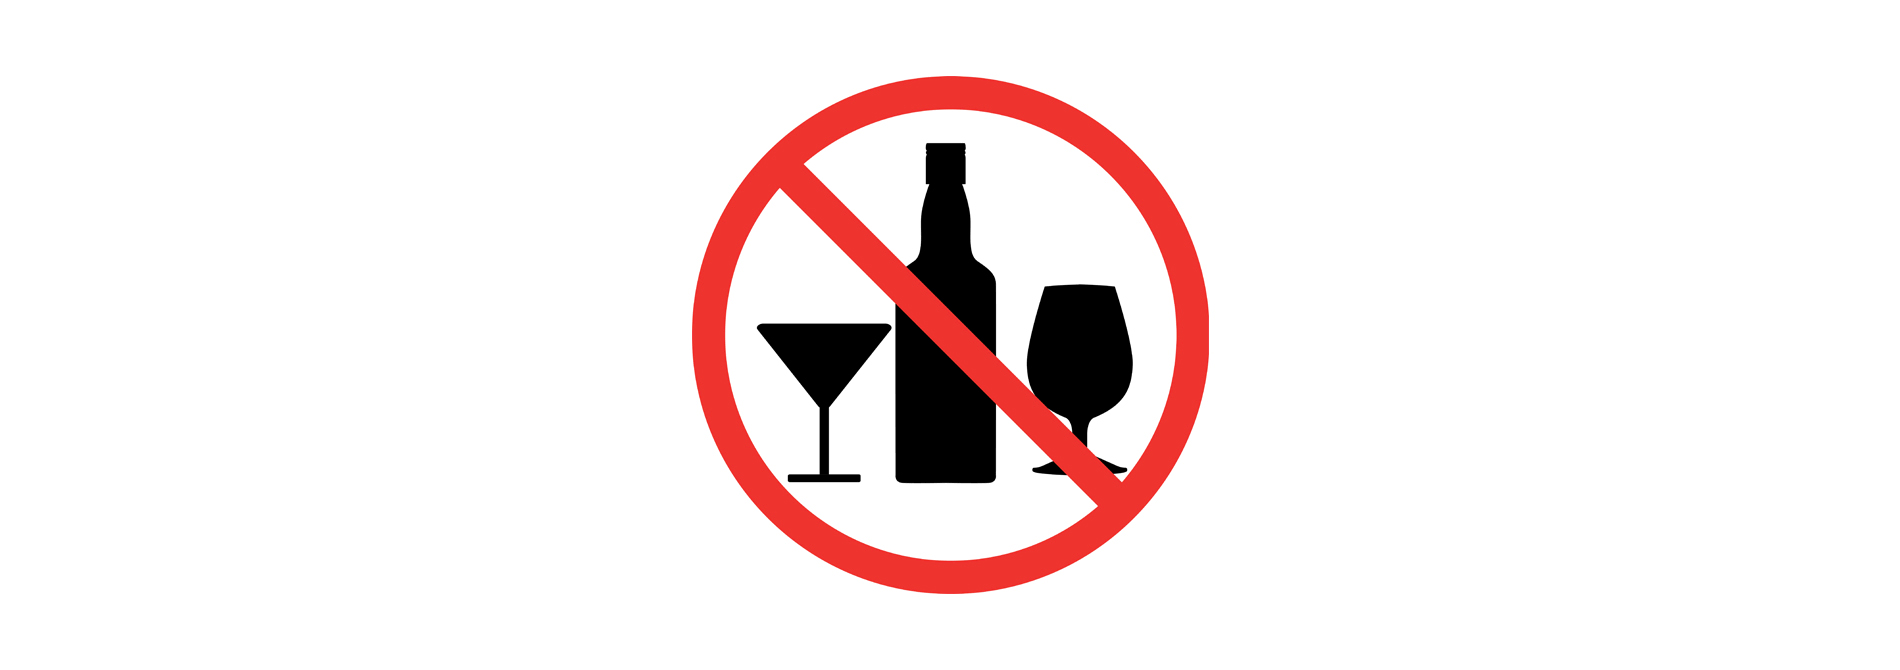 graphic depicting no alcohol